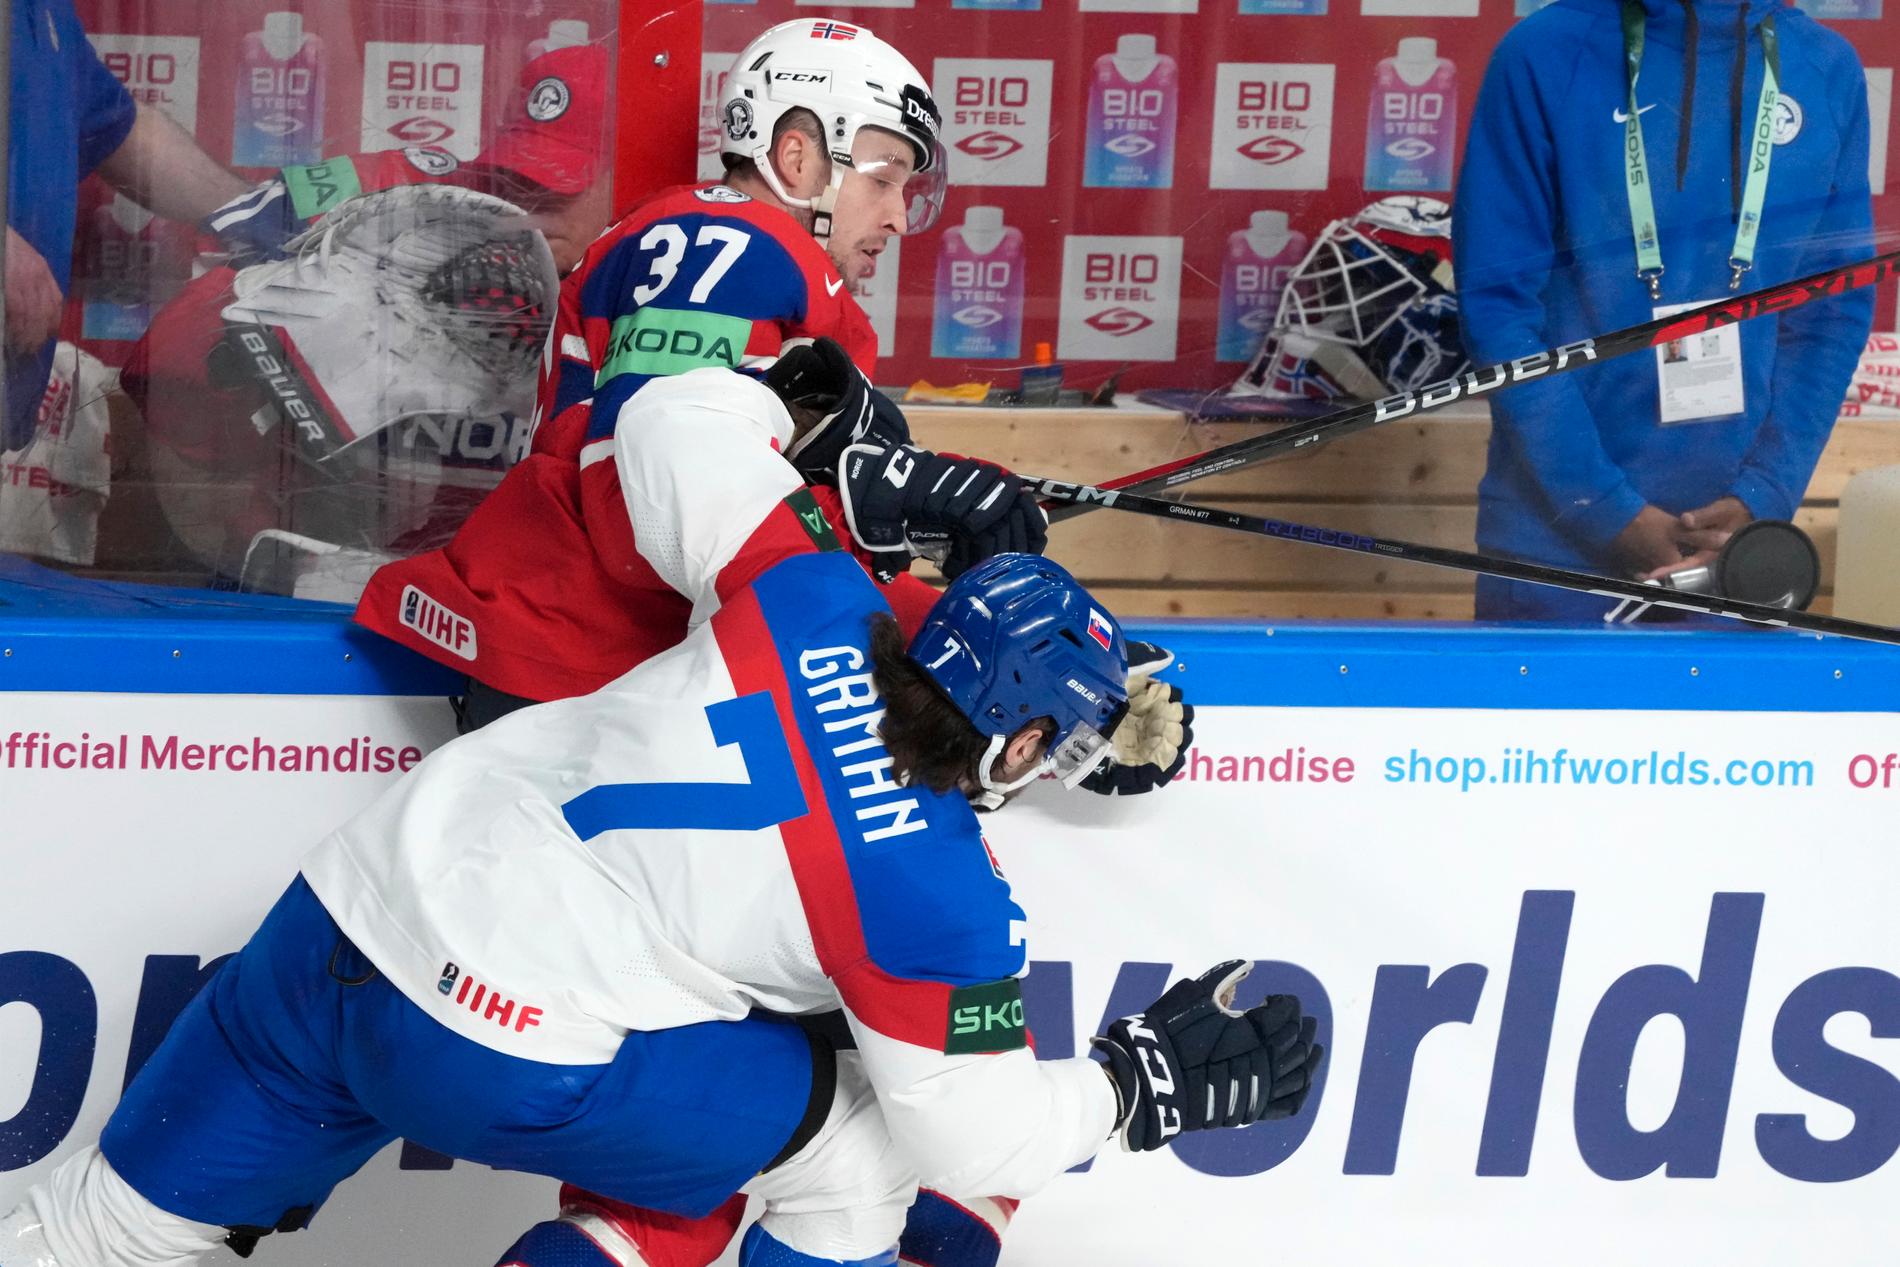 Ice Hockey World Cup: Norway is back on Earth after losing 1-4 to Slovakia